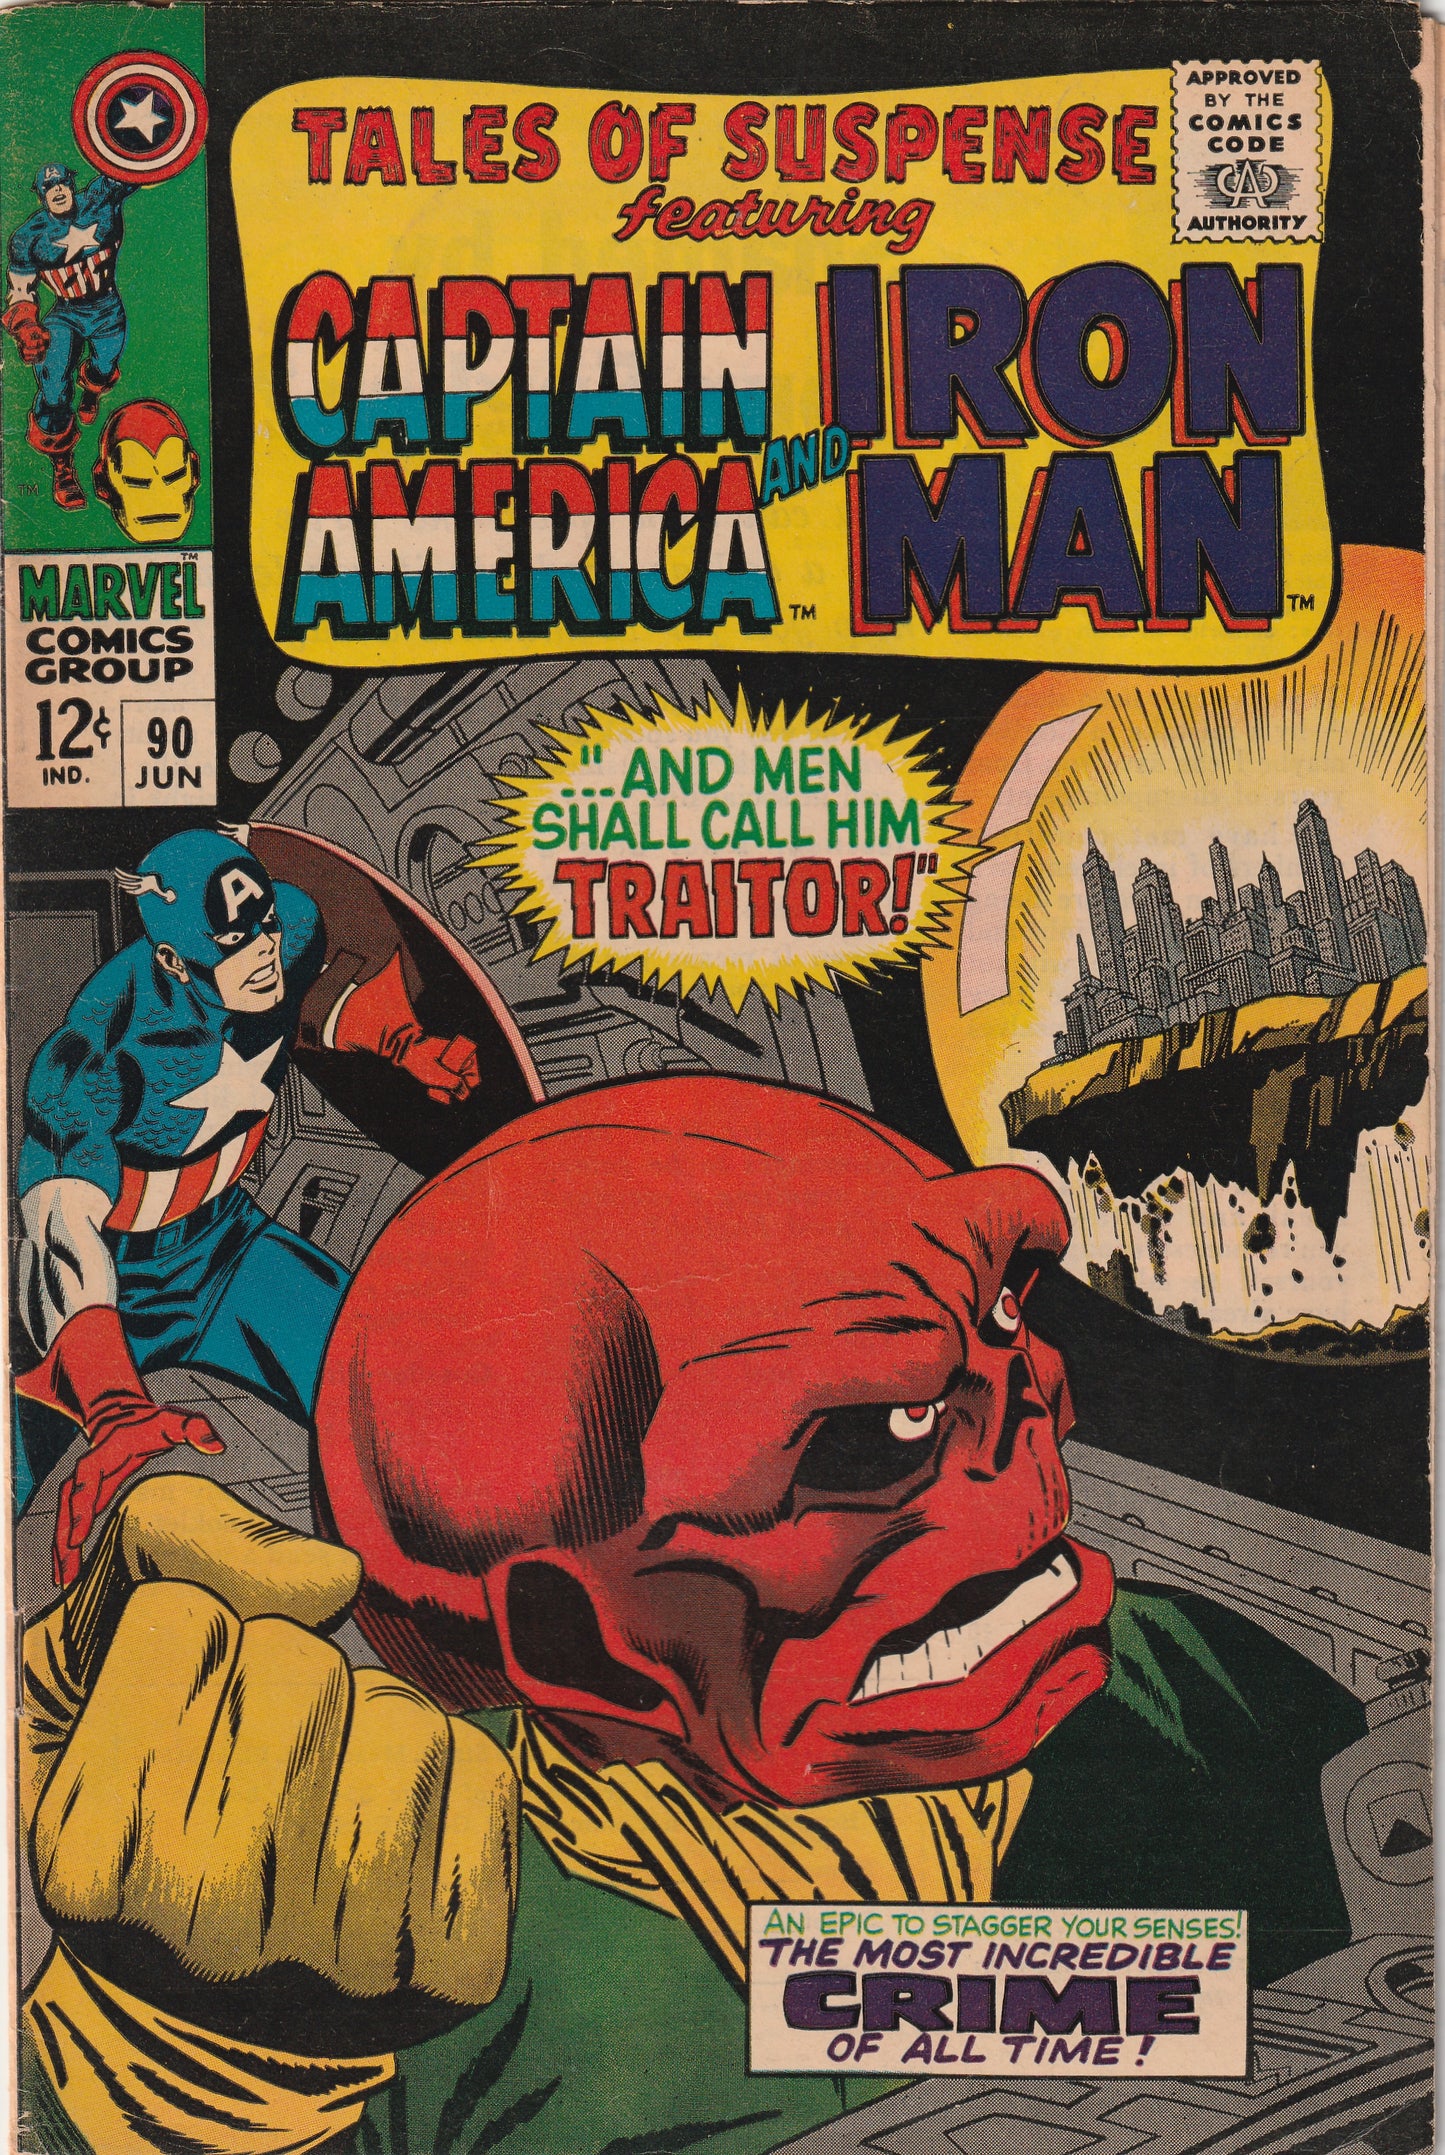 Tales of Suspense #90 (1967) - Featuring Captain America and Iron Man